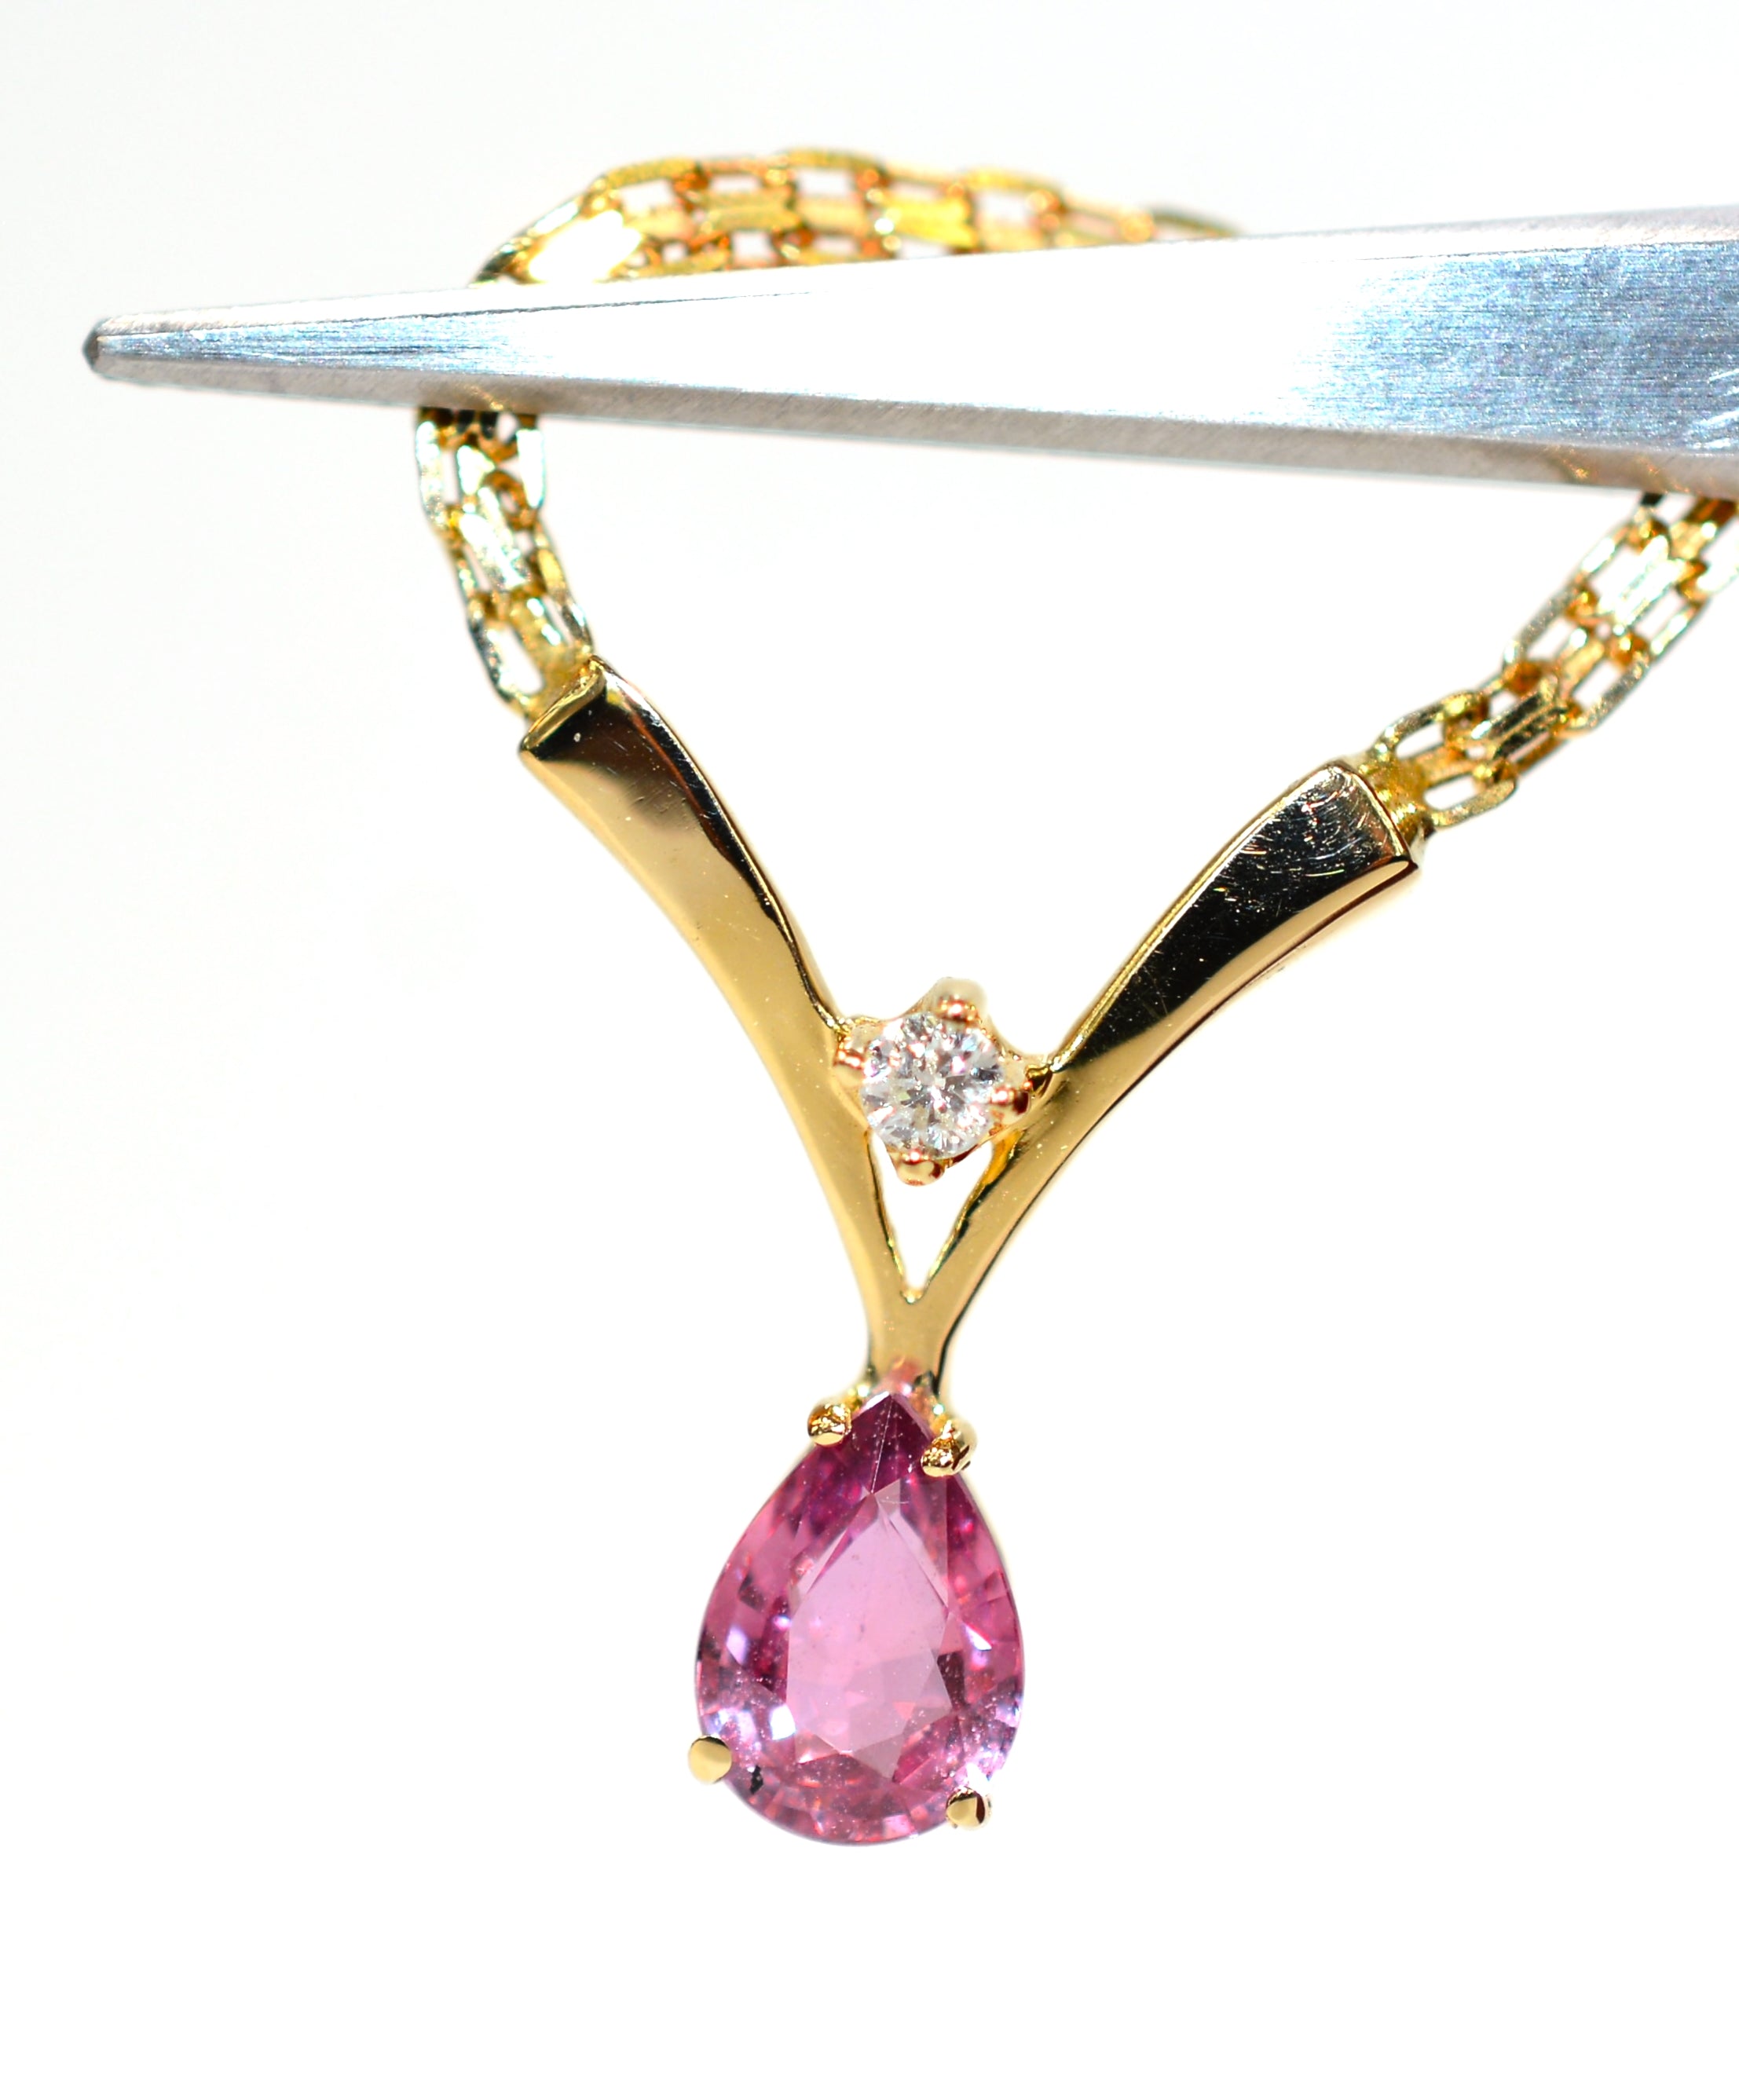 Natural Padparadscha Sapphire & Diamond Necklace 14K Solid Gold .97tcw Sapphire Necklace Pink Necklace Gemstone Necklace Cocktail Necklace